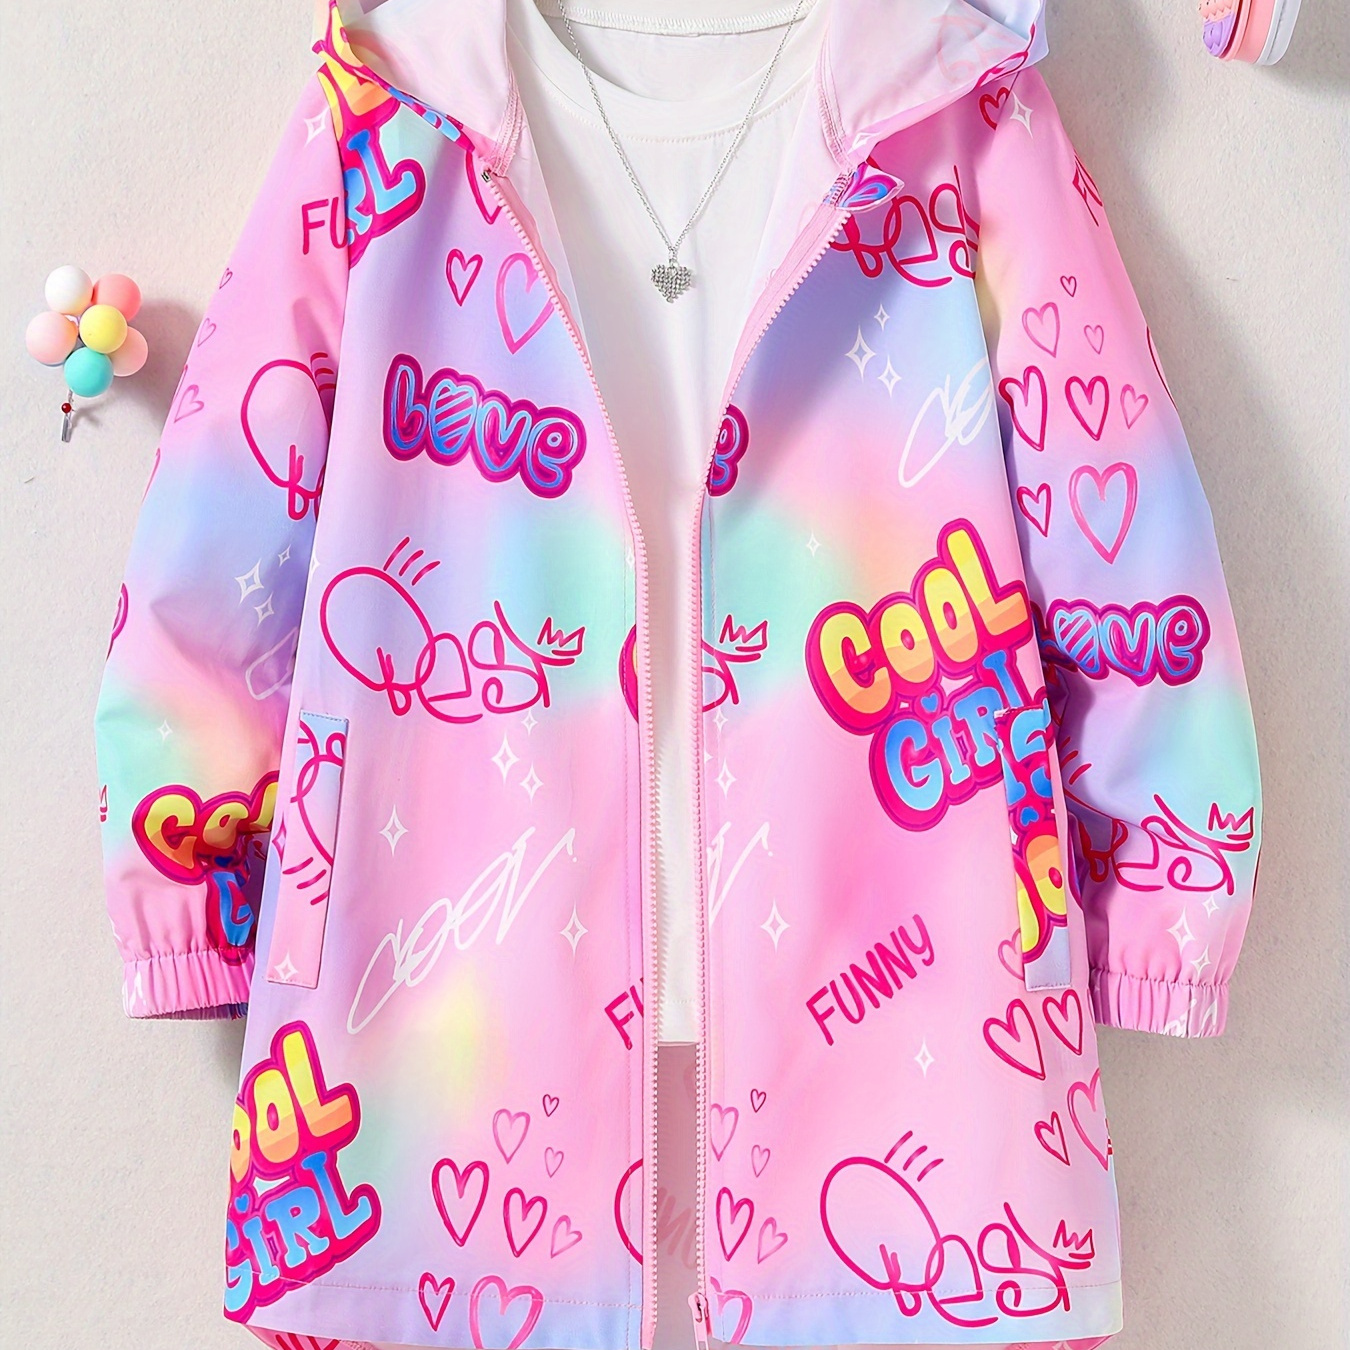 

Cool Girl Graffiti Style Lightweight Casual Hoodie Jacket With Slight High Low Design, Girls Windbreaker For Outdoor